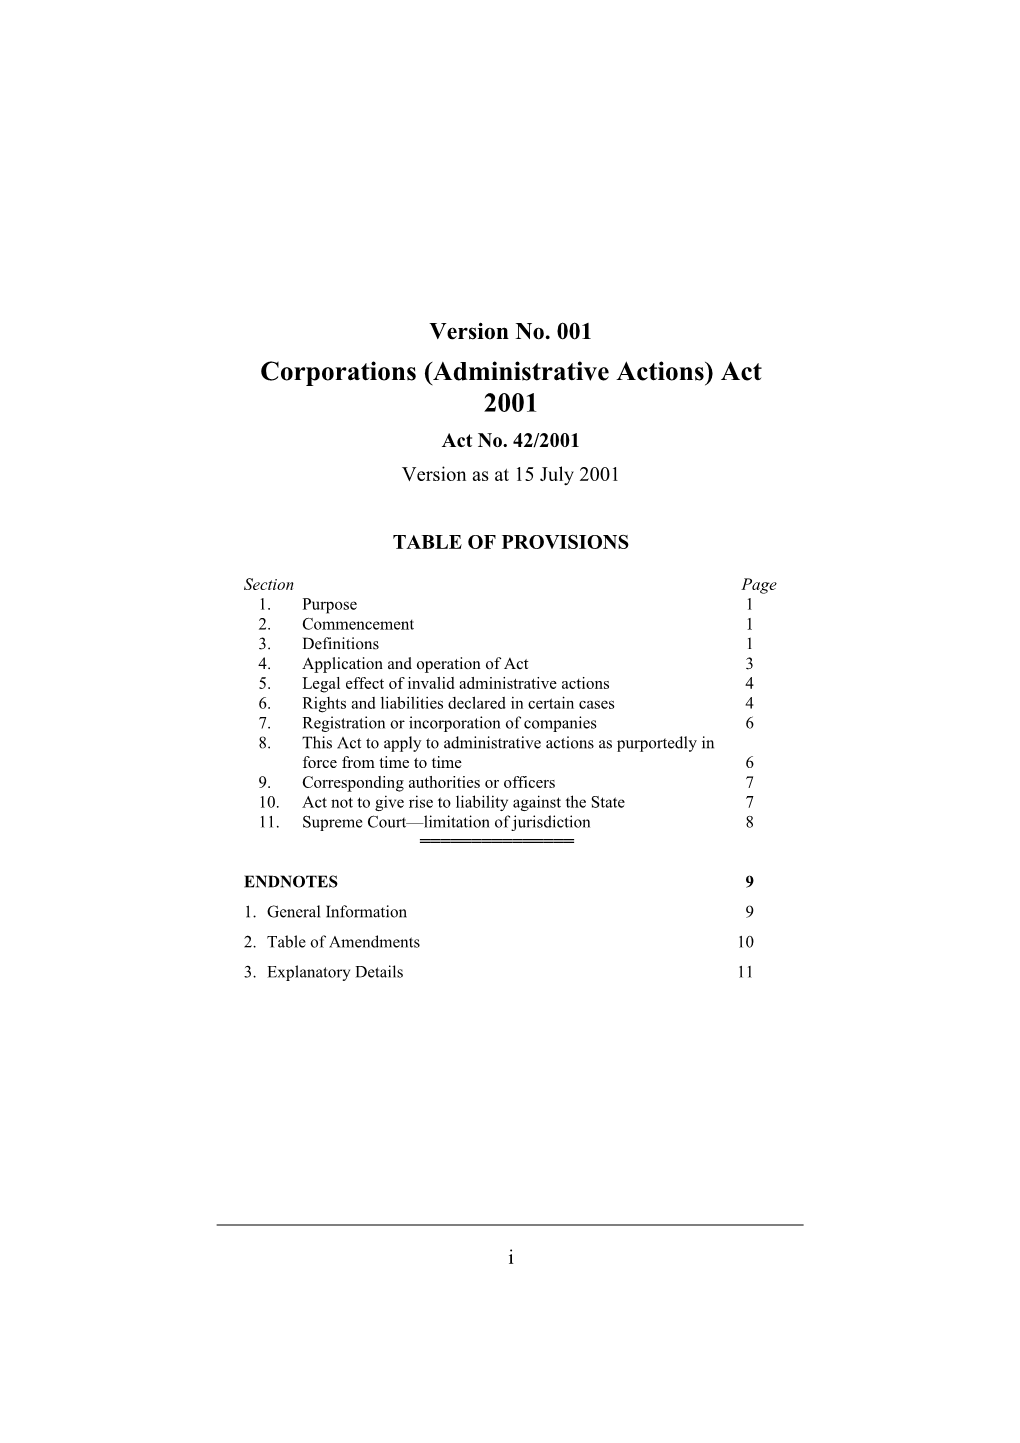 Corporations (Administrative Actions) Act 2001